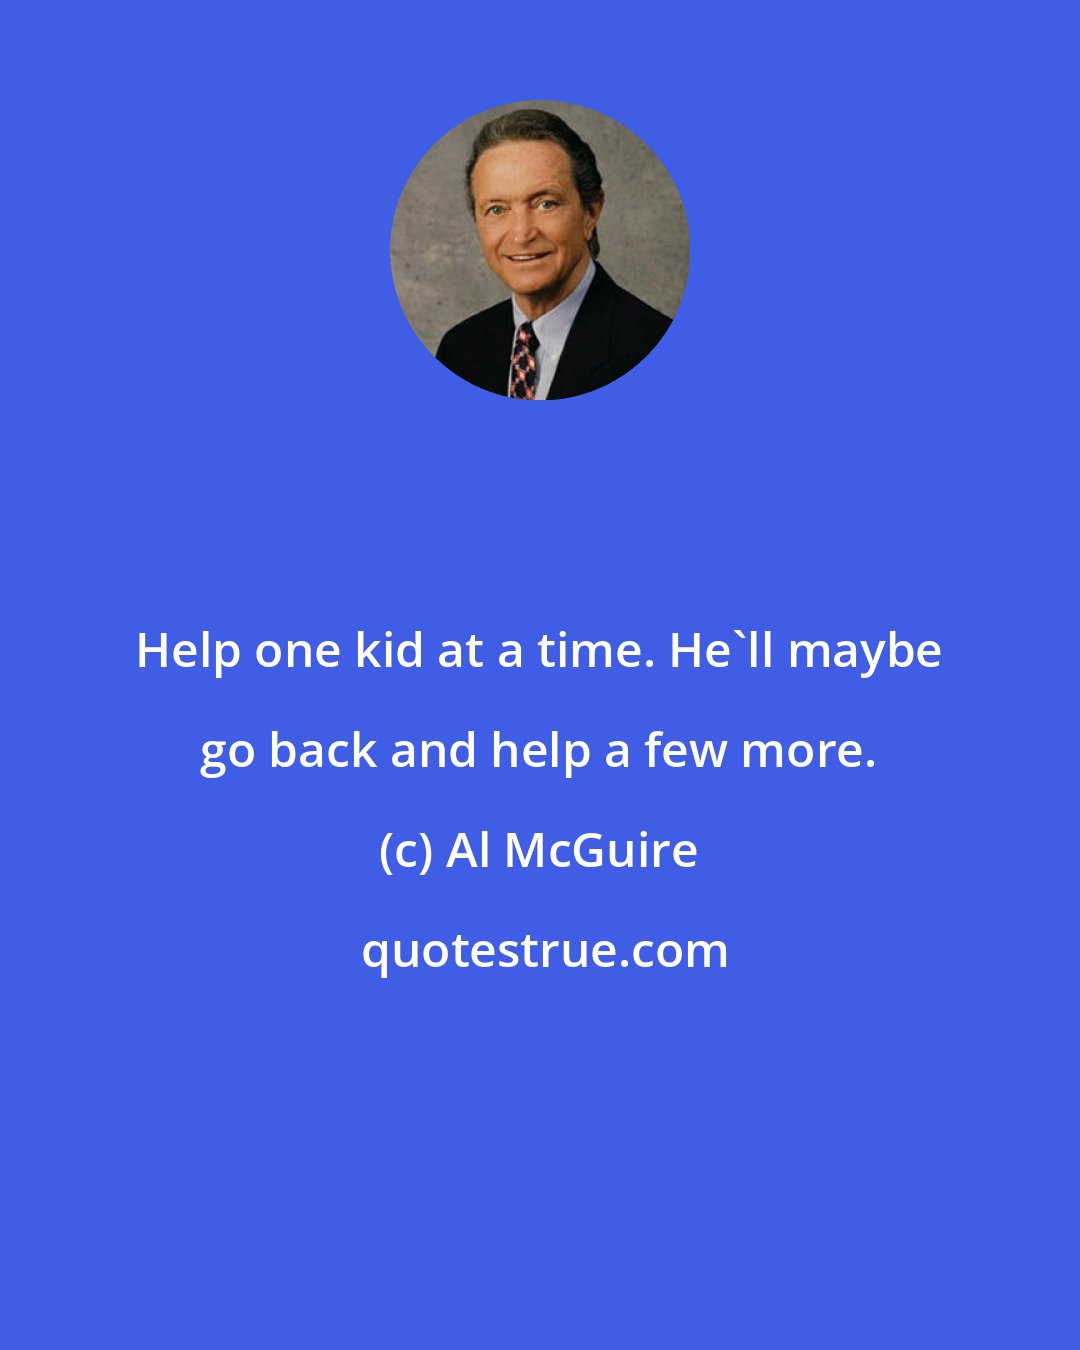 Al McGuire: Help one kid at a time. He'll maybe go back and help a few more.